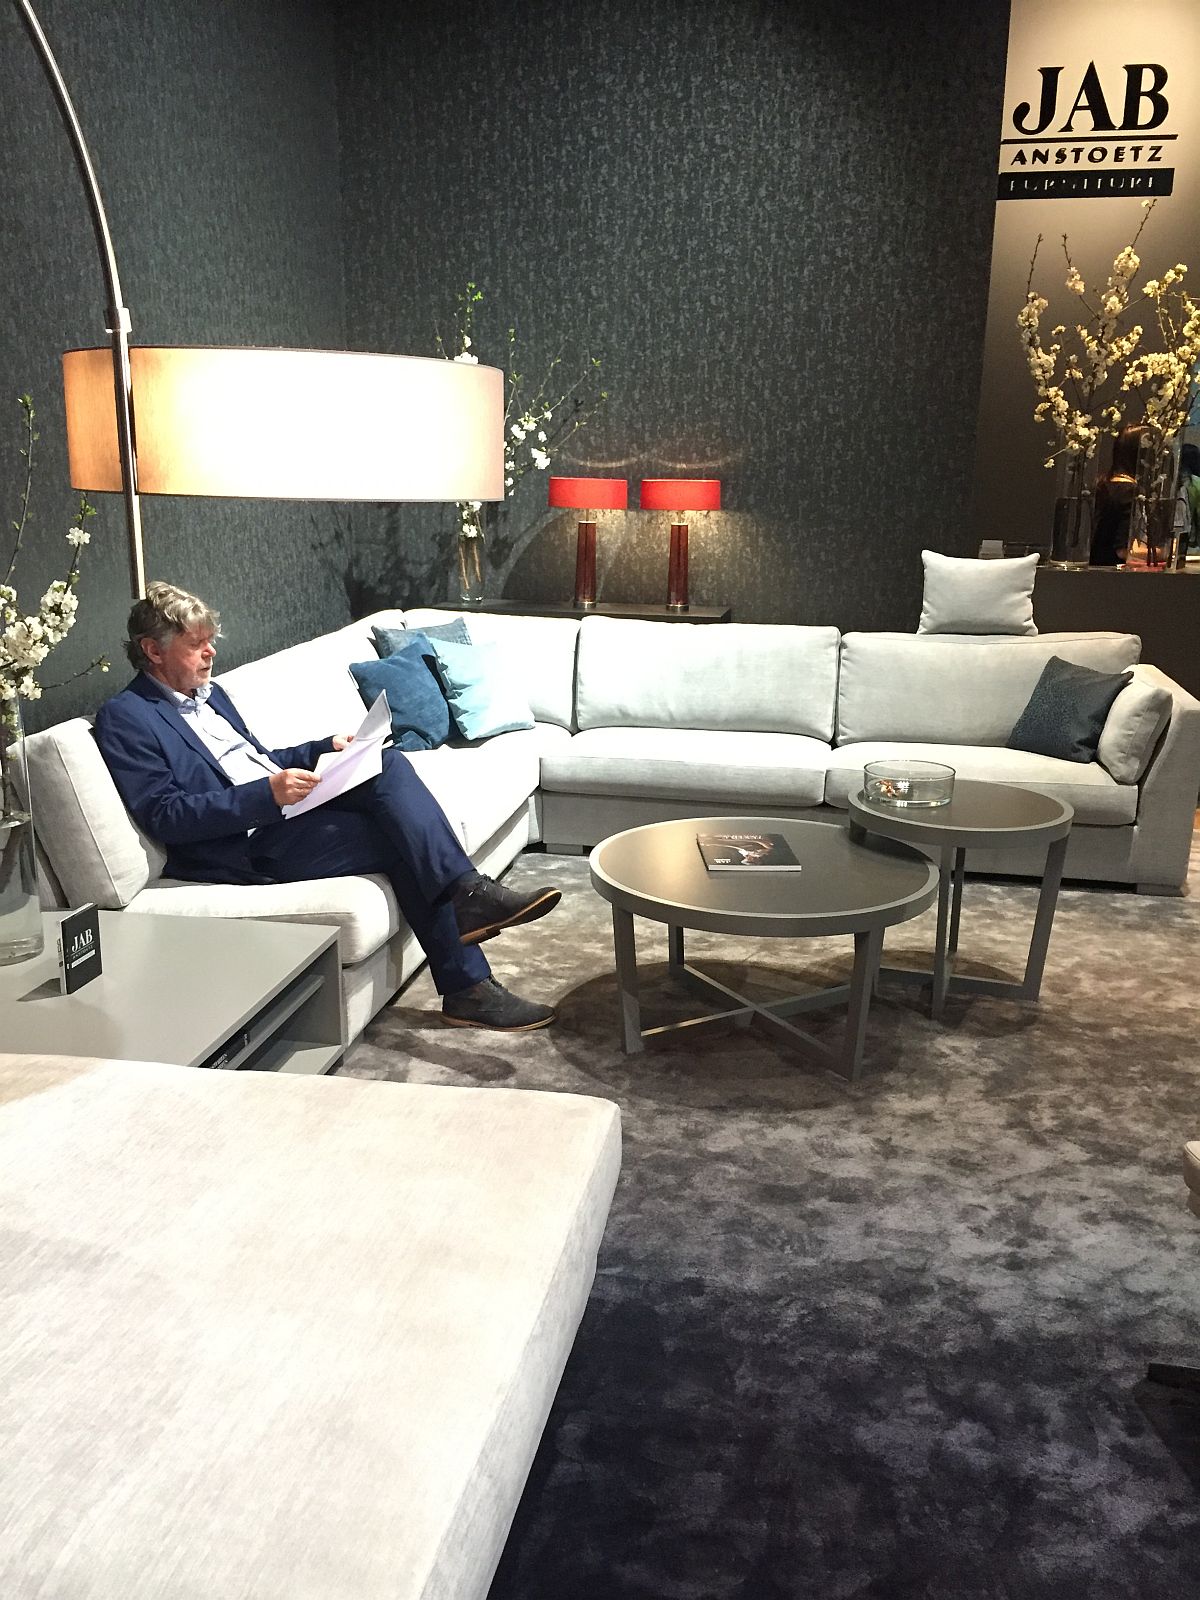 Fascinating new living room decor unveiled by JAB Anstoetz at Milan 2016